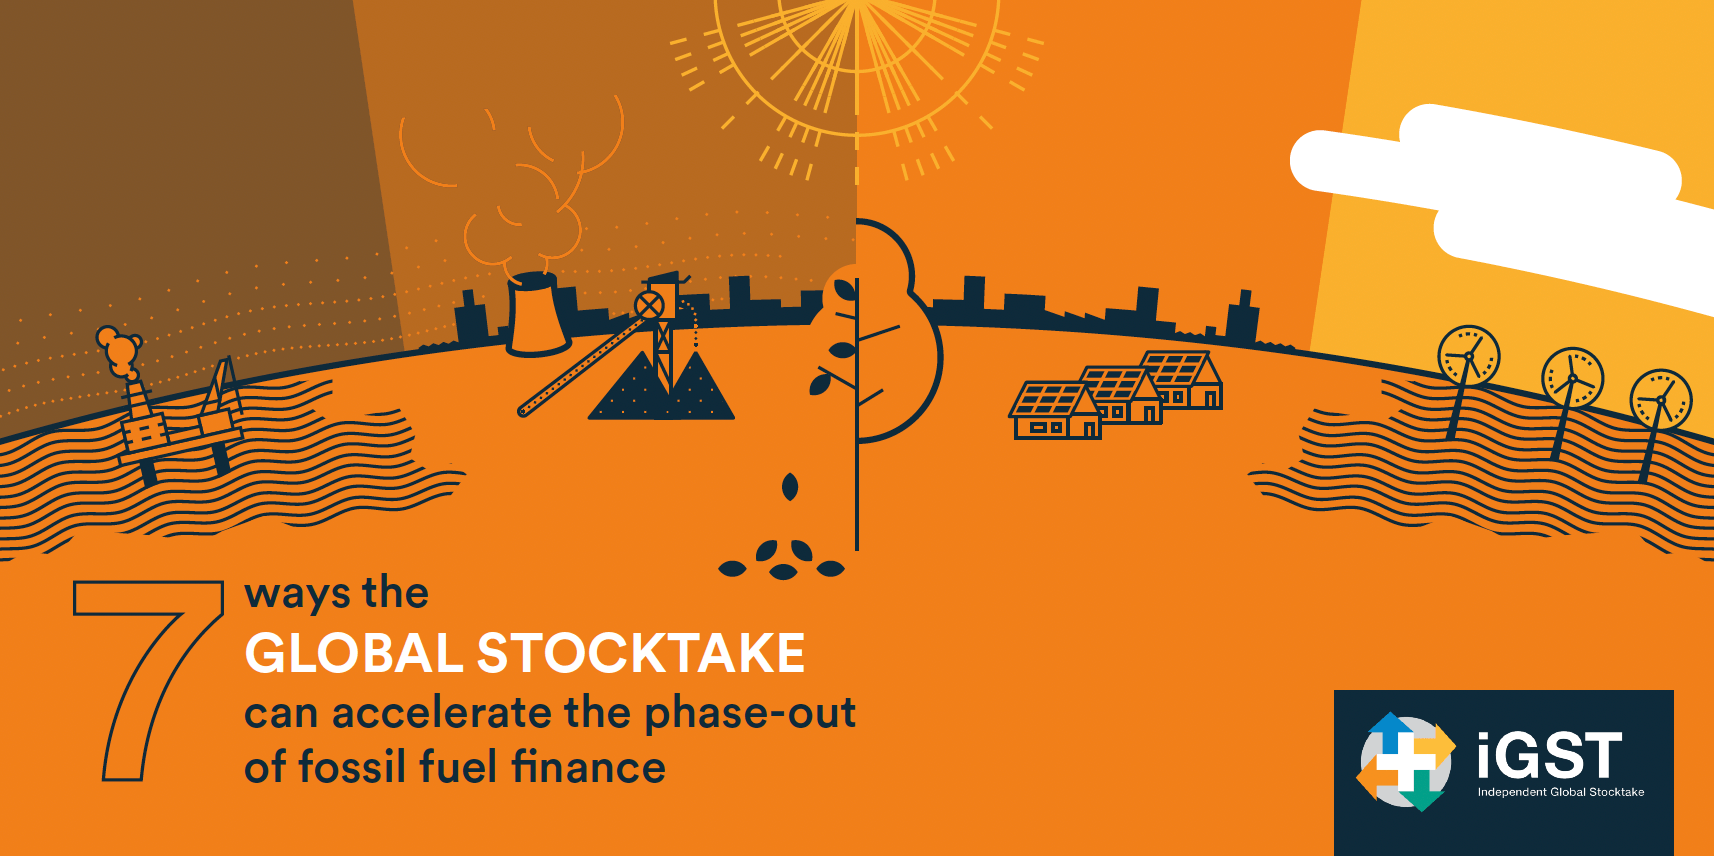 Seven ways the Global Stocktake can accelerate the phase-out of fossil fuel finance